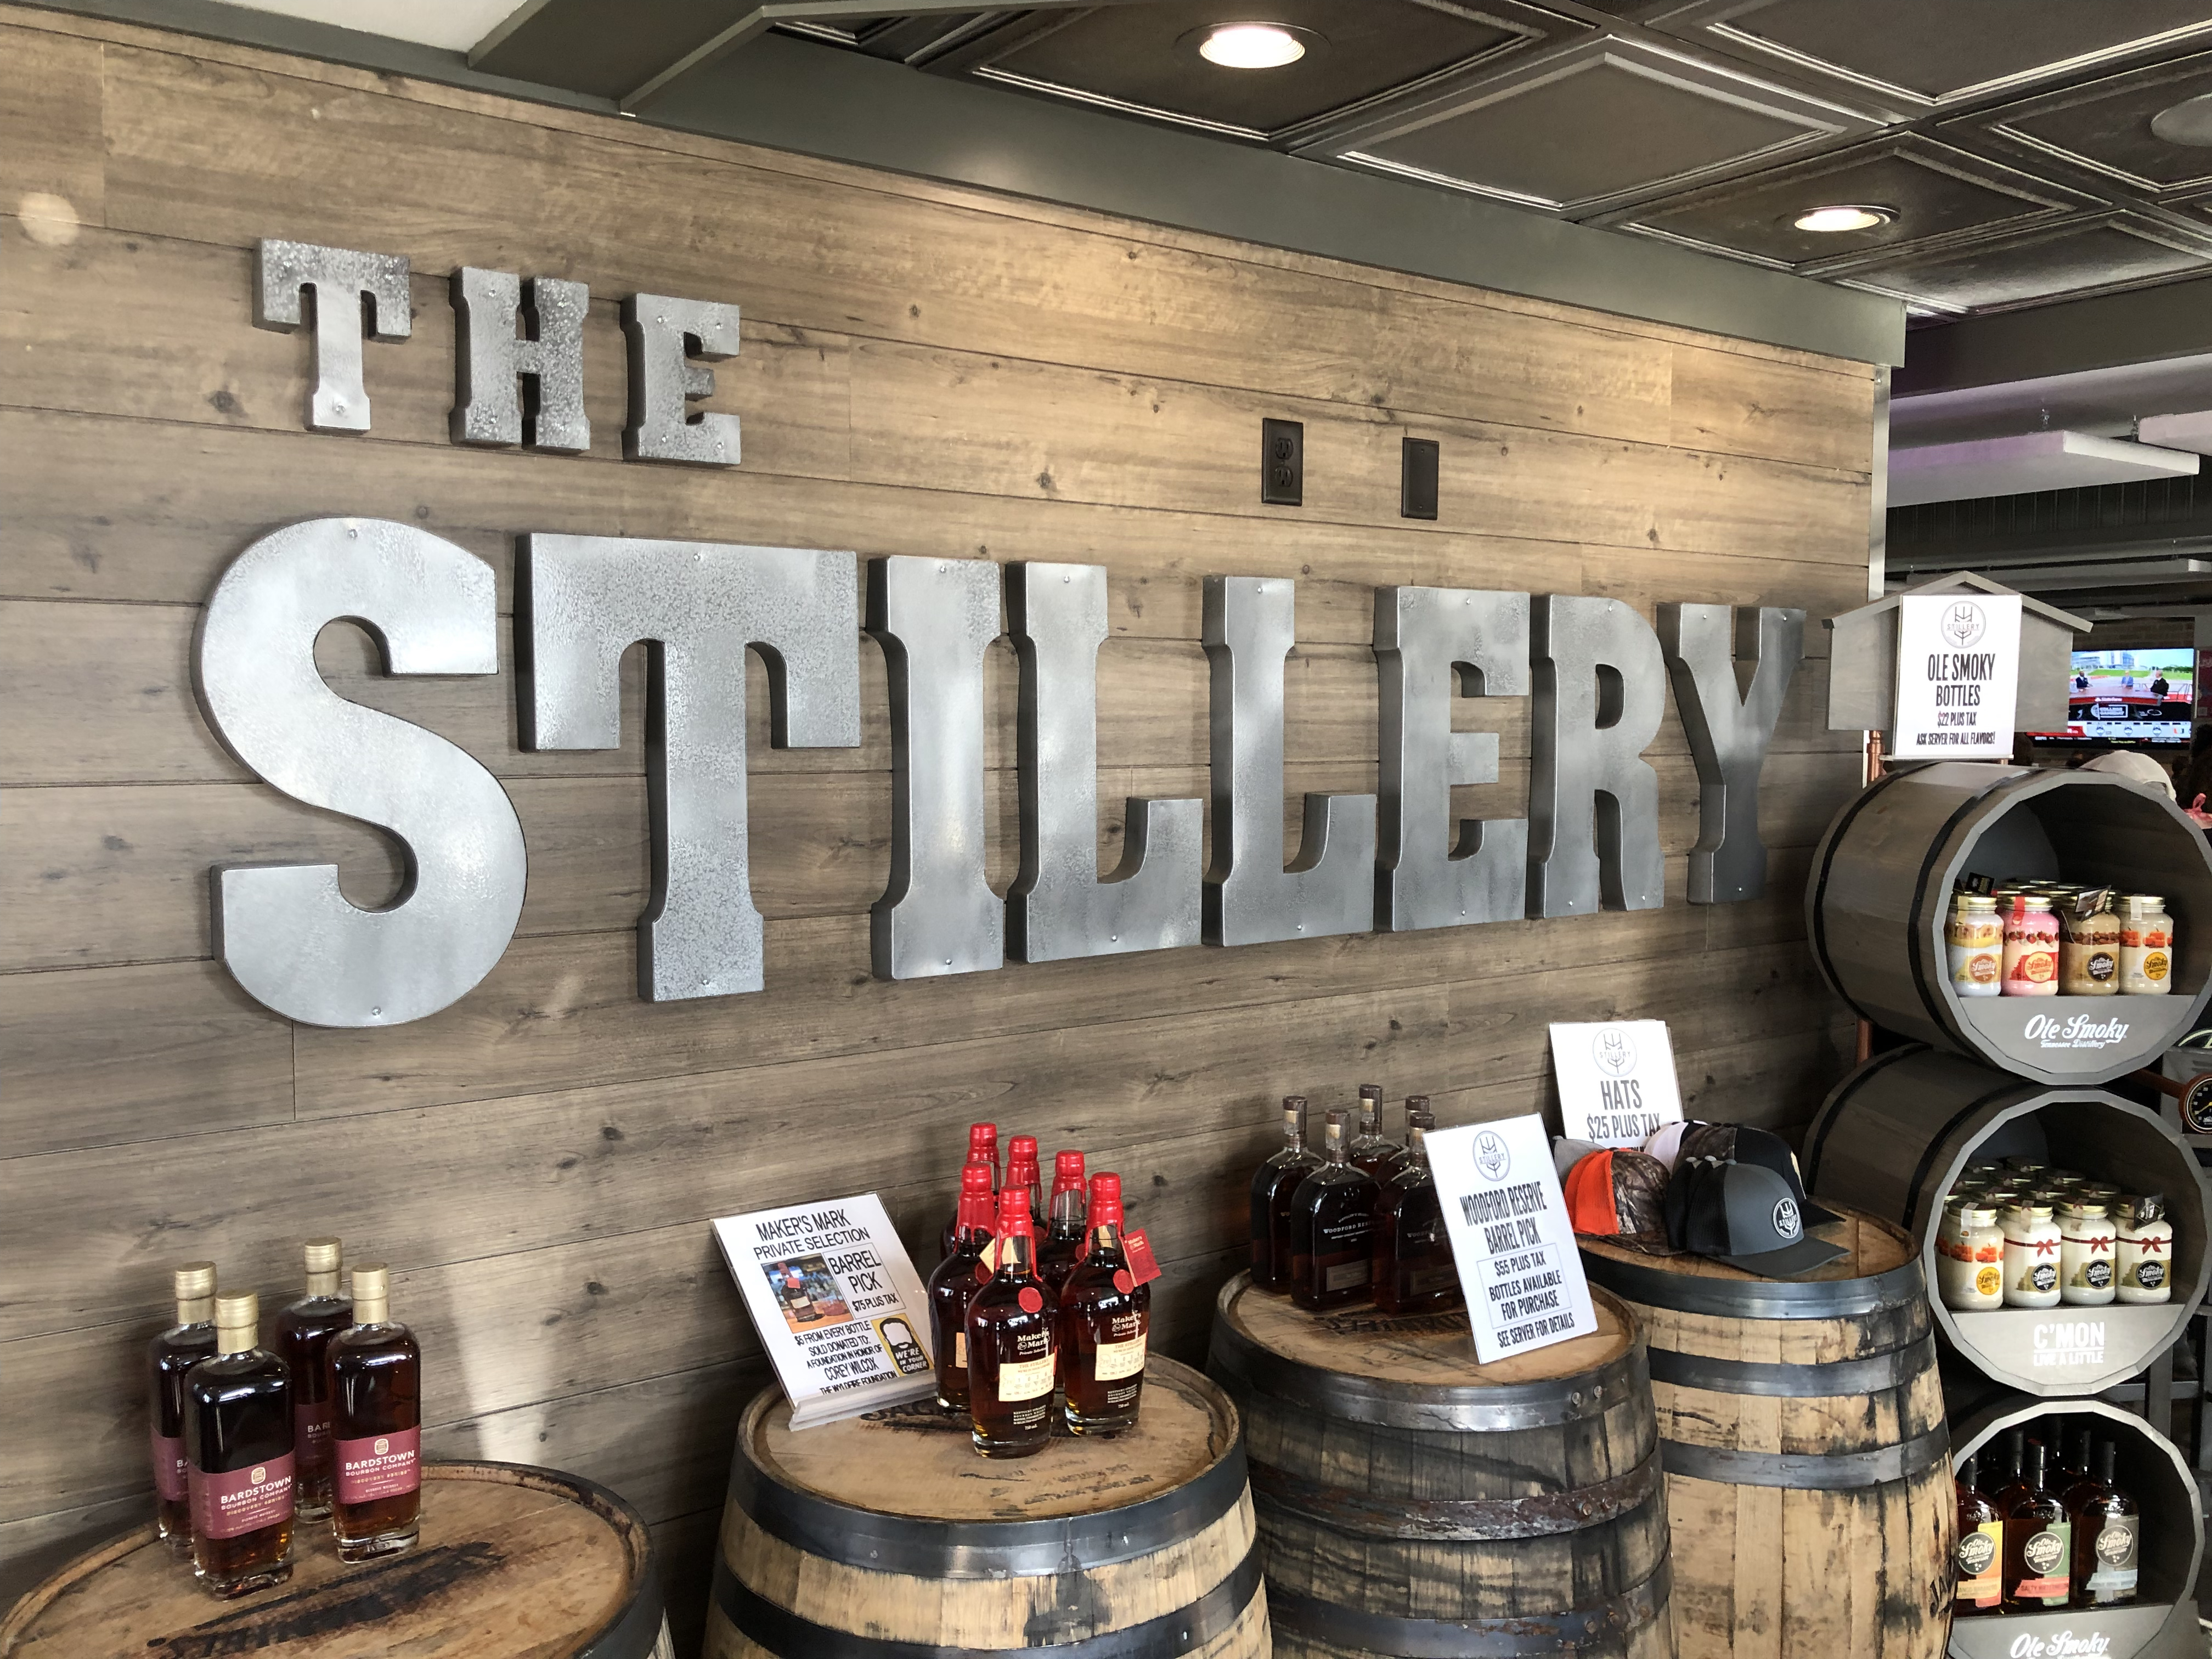 The Stillery sign and whiskey barrels